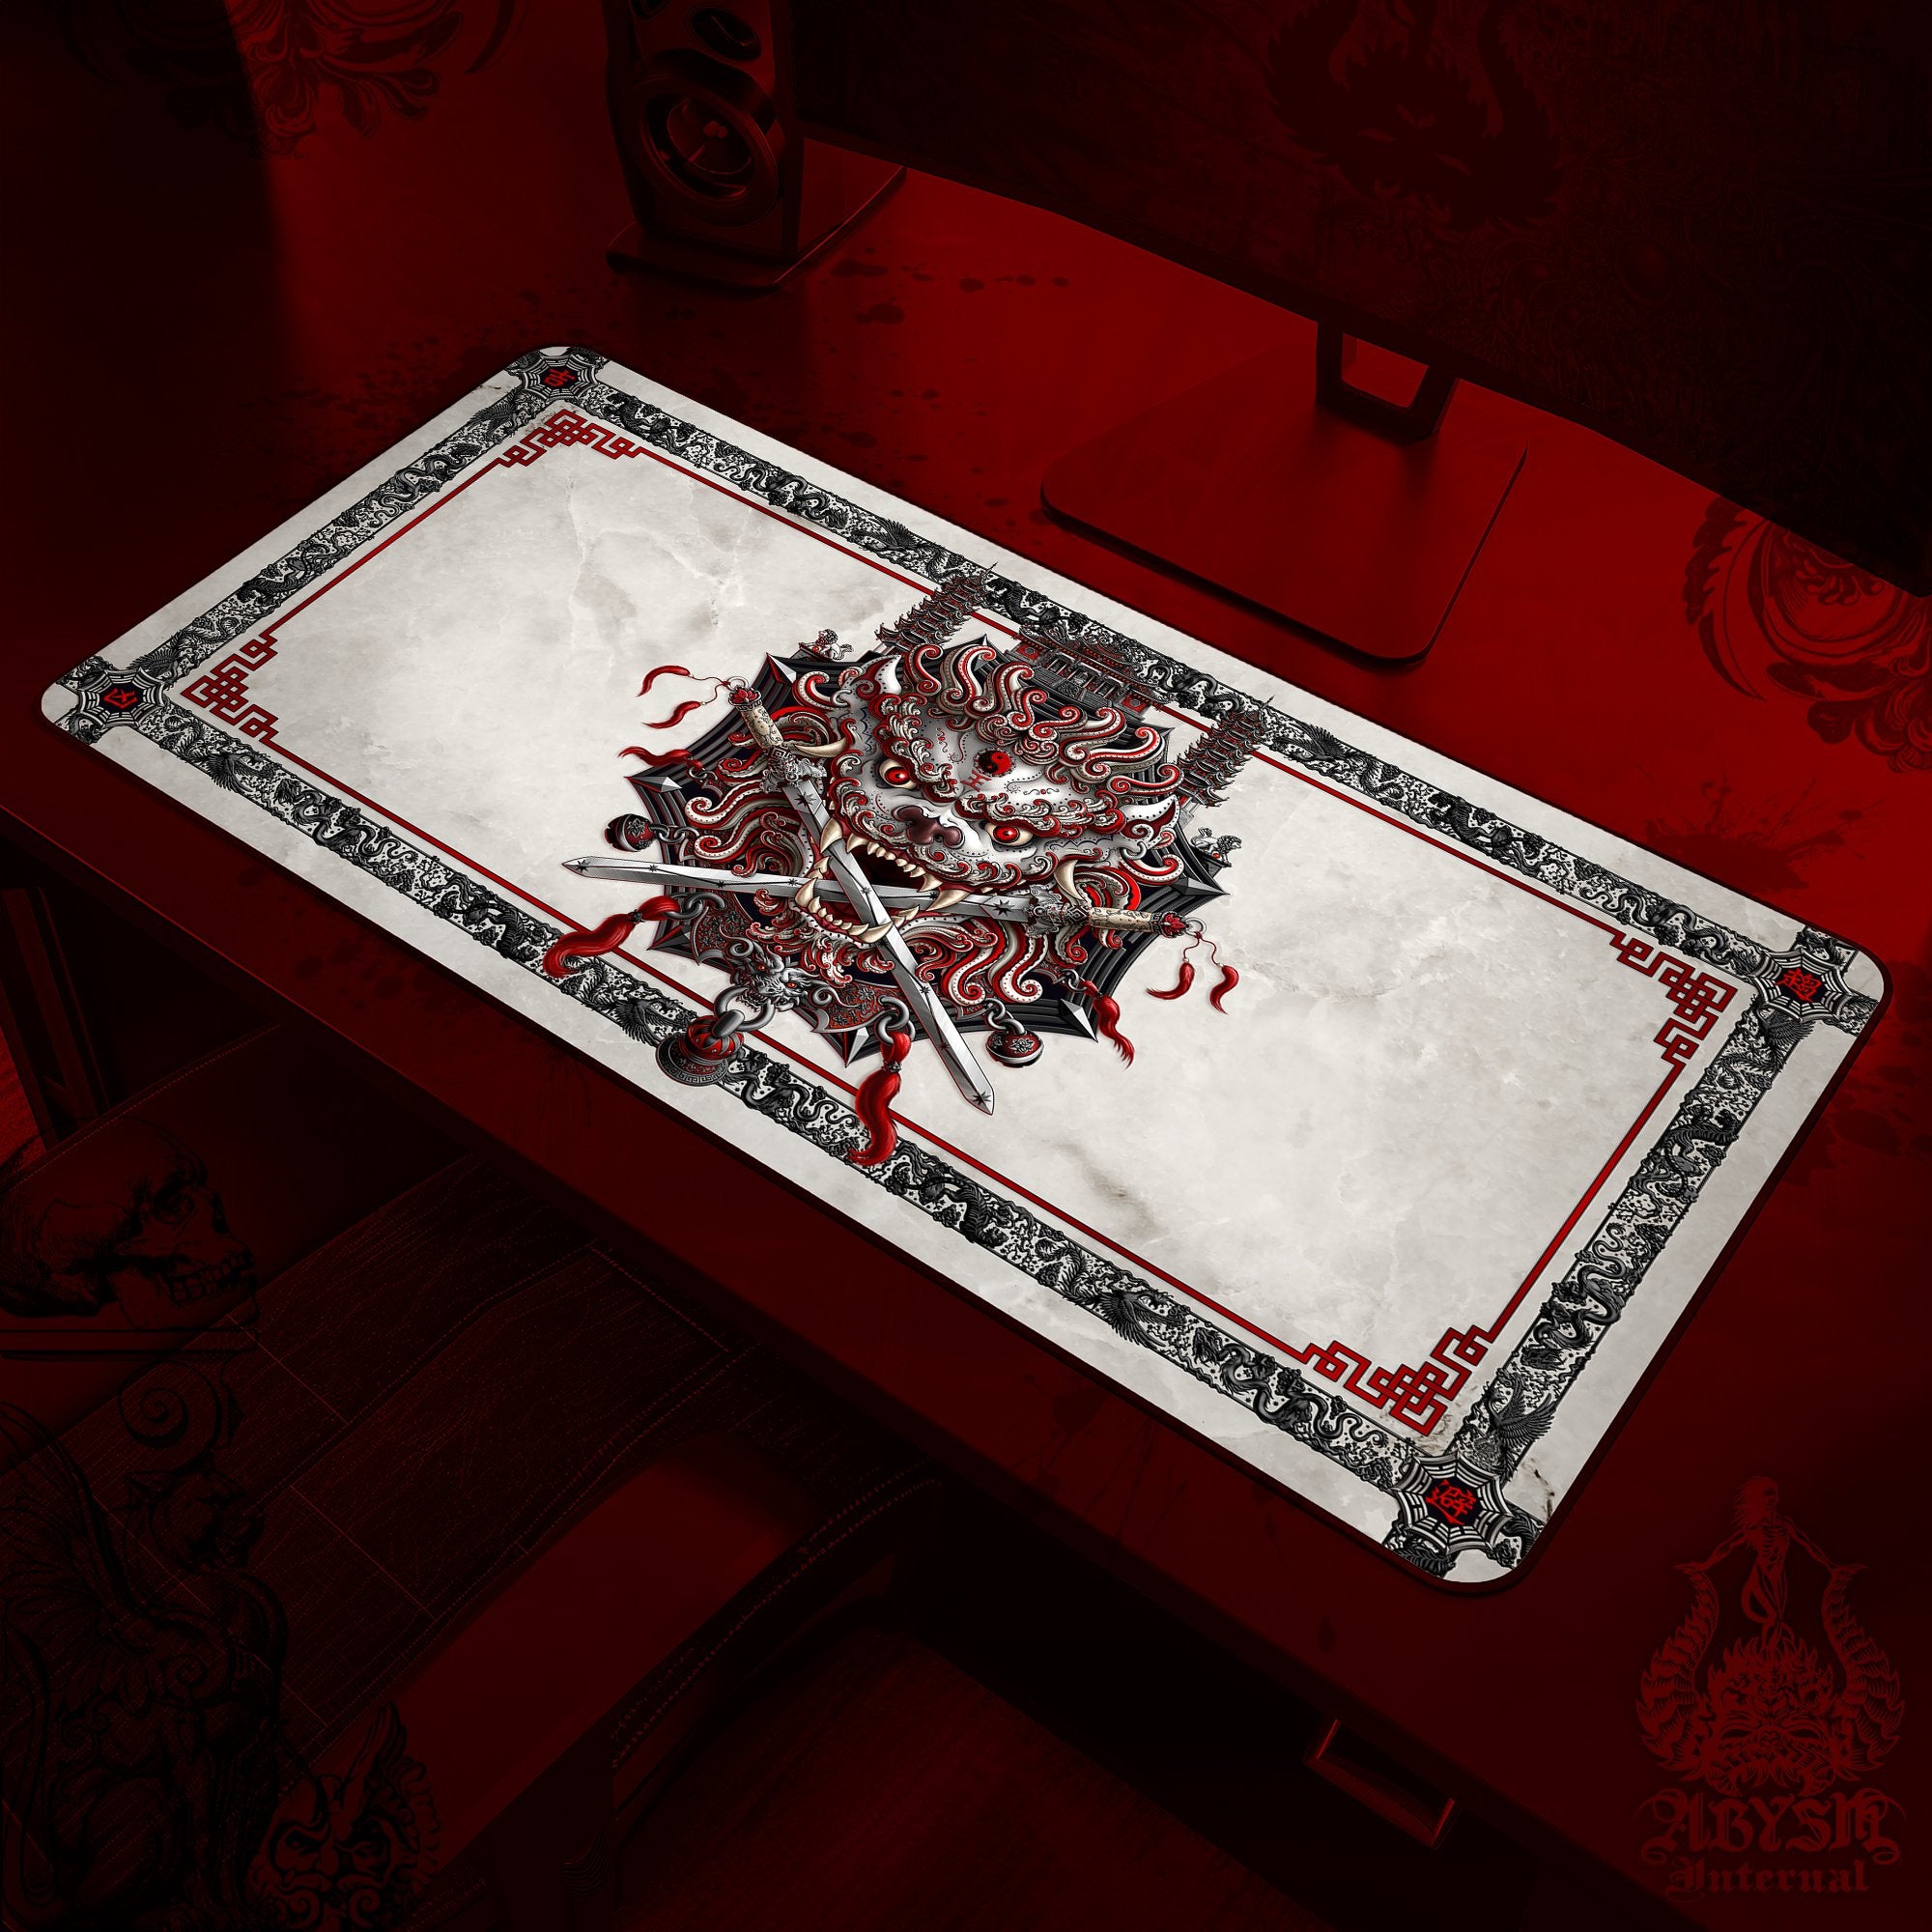 Asian Lion Workpad, Taiwan Desk Mat, Chinese Gaming Mouse Pad, Bloody White Goth Table Protector Cover, Fantasy Art Print - Red - Abysm Internal